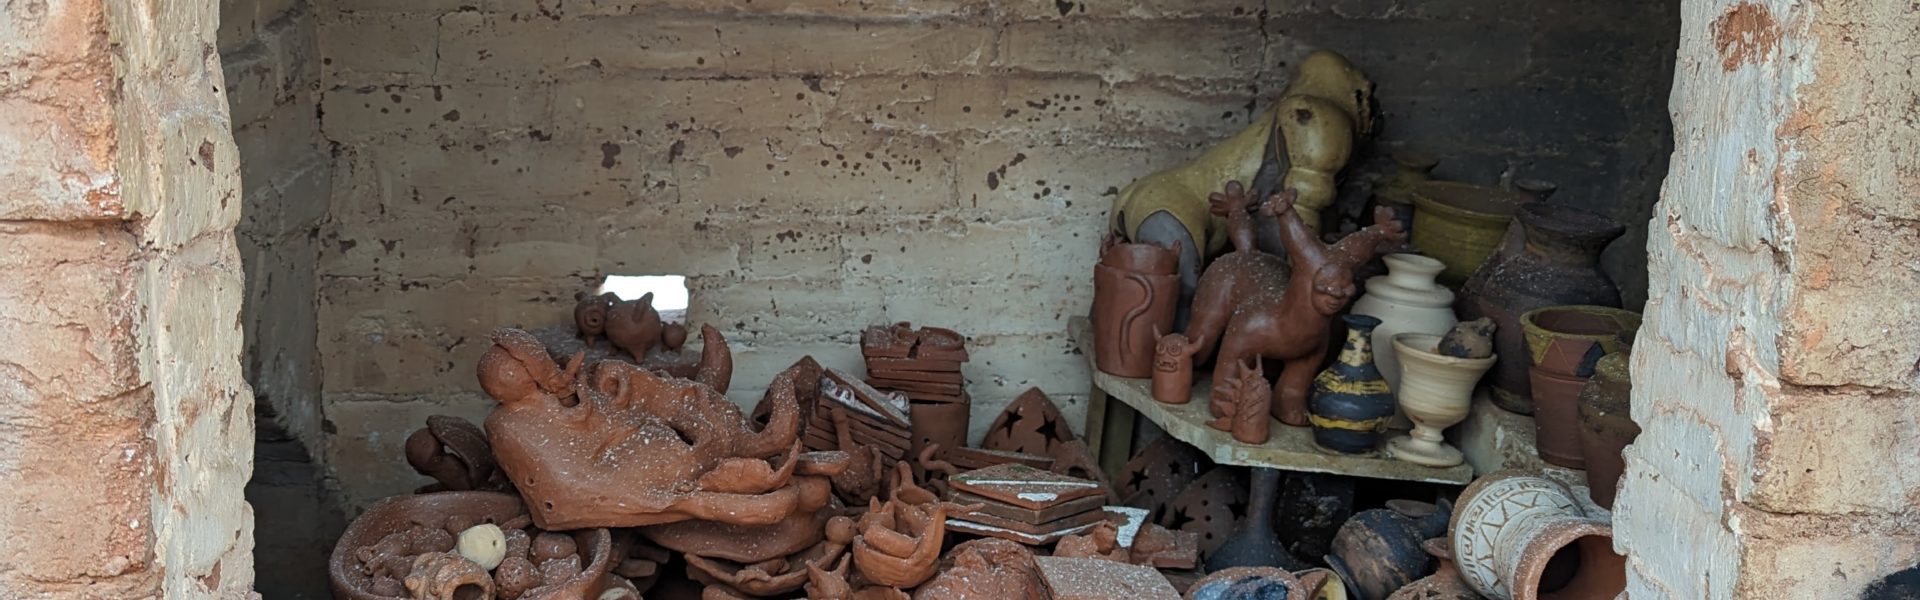 Looking through the open door of a brick kiln, we see ceramic vases, bowls, and dishes piled on top of each other with a thin layer of ash coating everything.